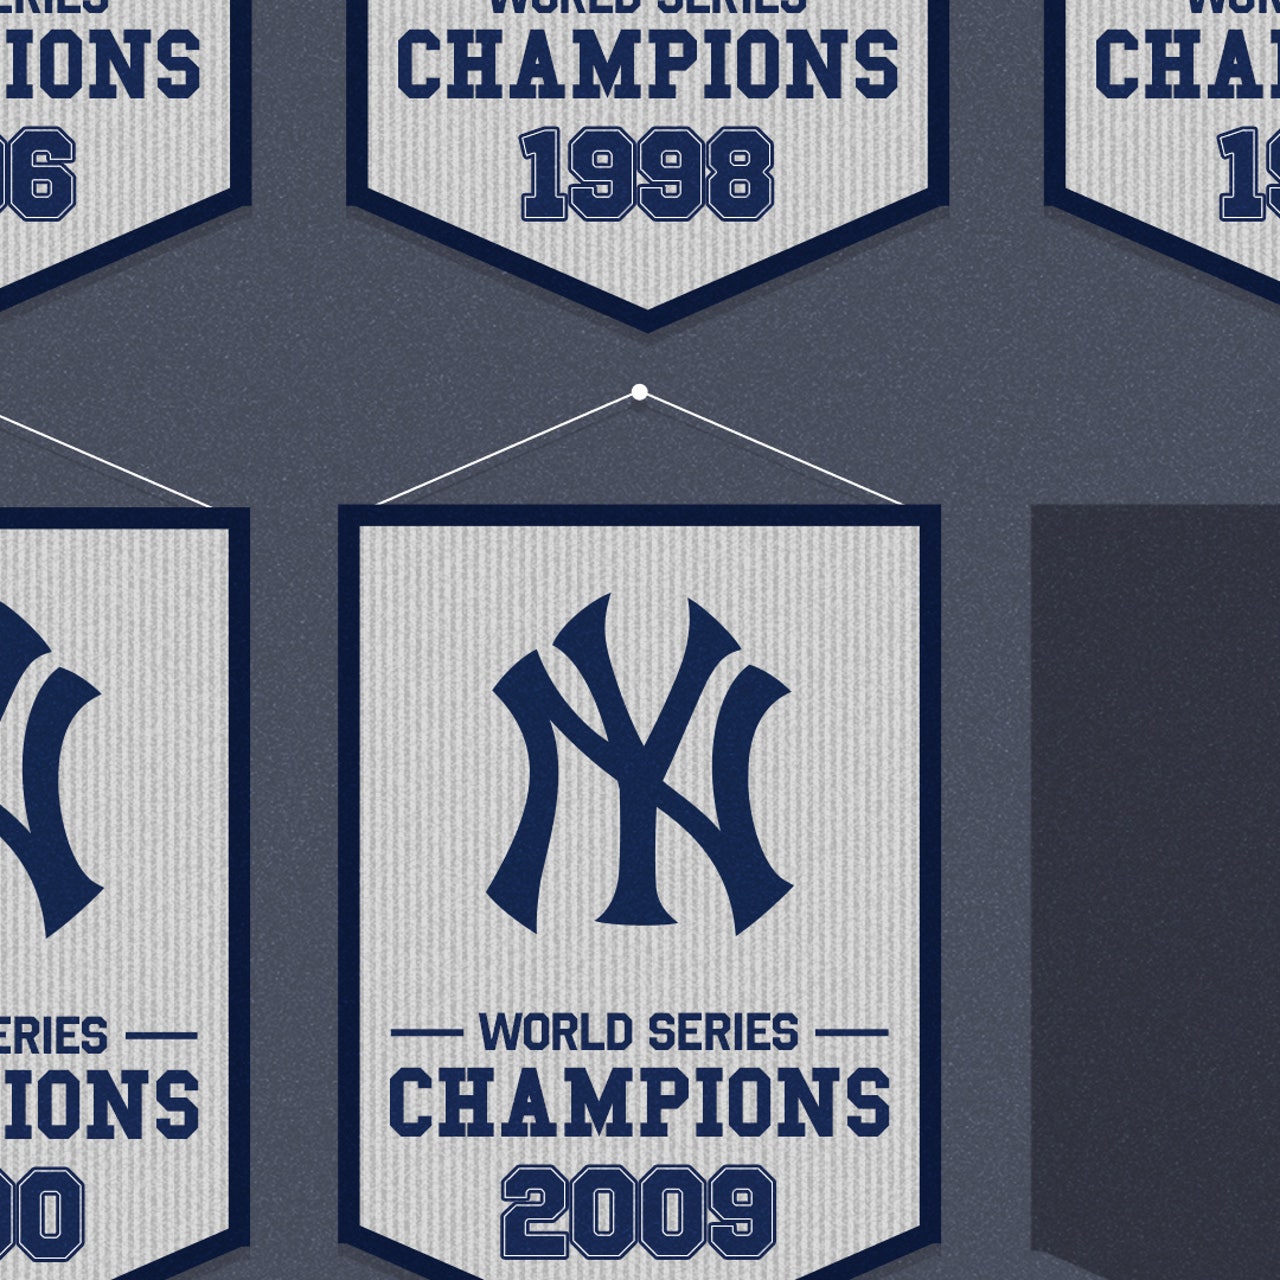 When does the Yankees' World Series drought become a curse?